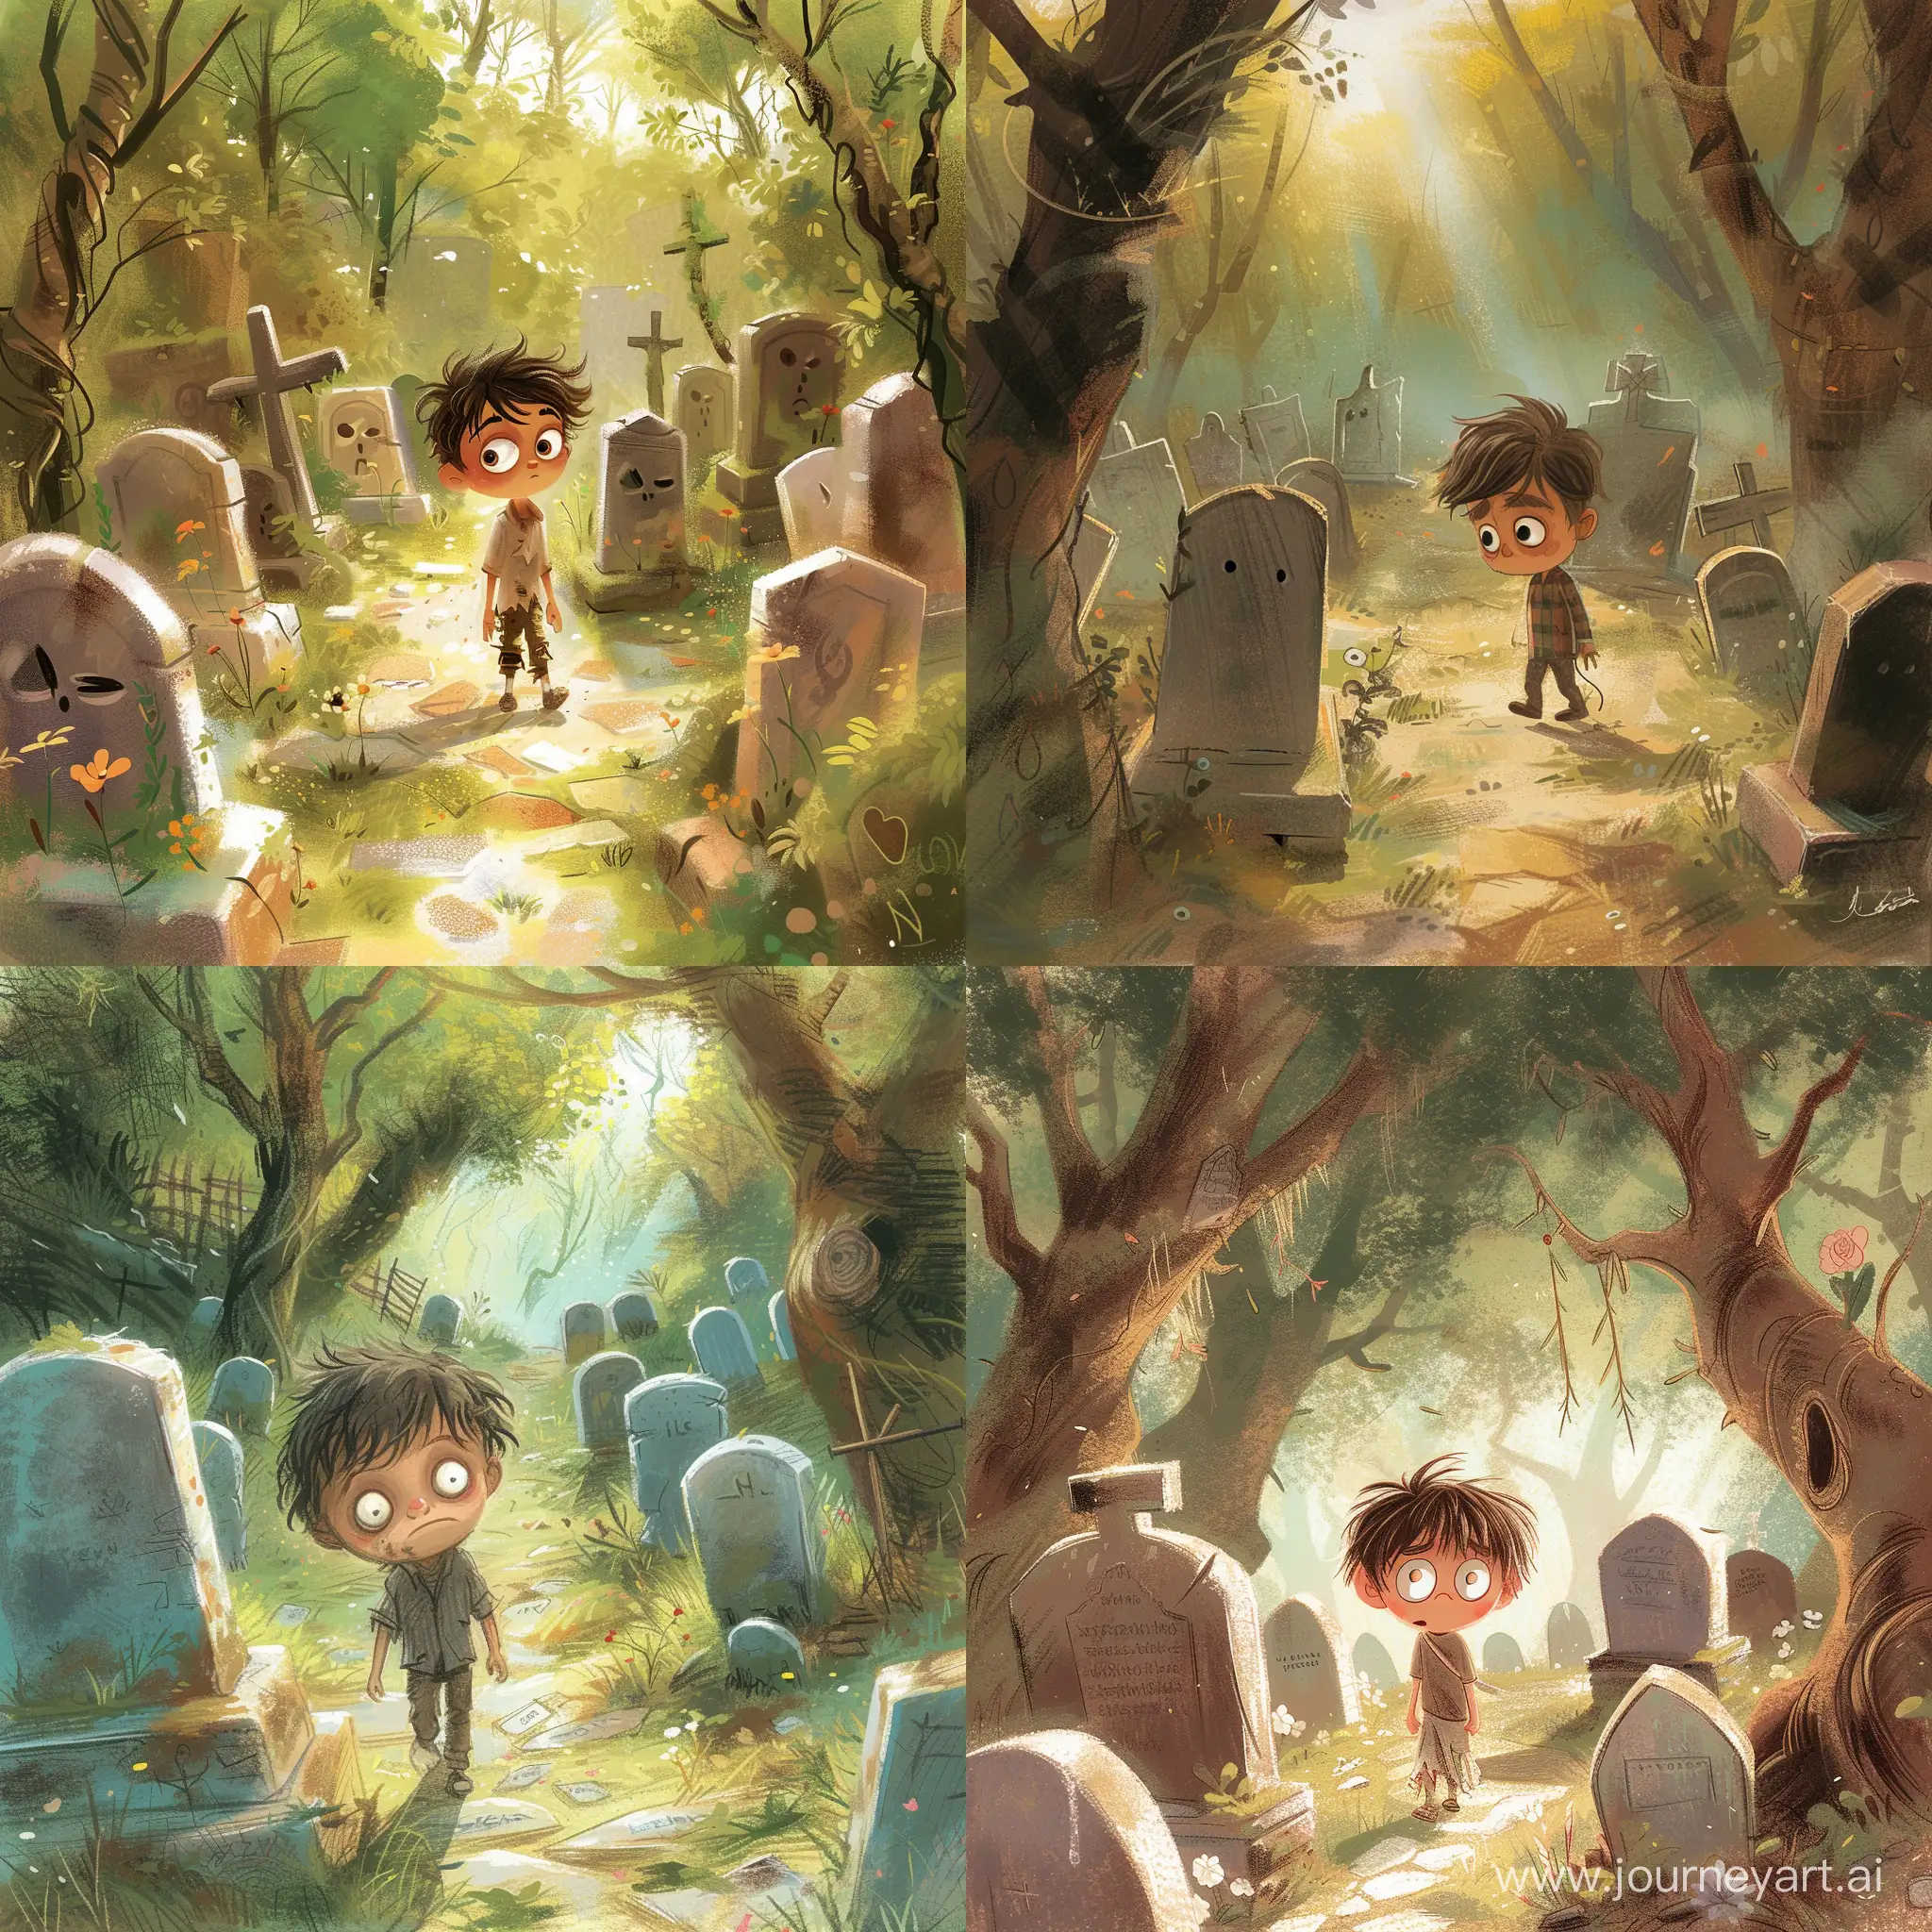 An illustration for a children's book, aimed at readers aged 6-10 years. The scene depicts a young boy, Felipe, with sad eyes and ragged clothes, walking through a small, old cemetery. He is visiting his father's grave, surrounded by simple tombstones and a few flowers. The atmosphere is serene but melancholic, with soft sunlight filtering through the trees. The style is colorful, whimsical, and gentle, to capture the emotions of loss and remembrance in a way that is appropriate for young readers.